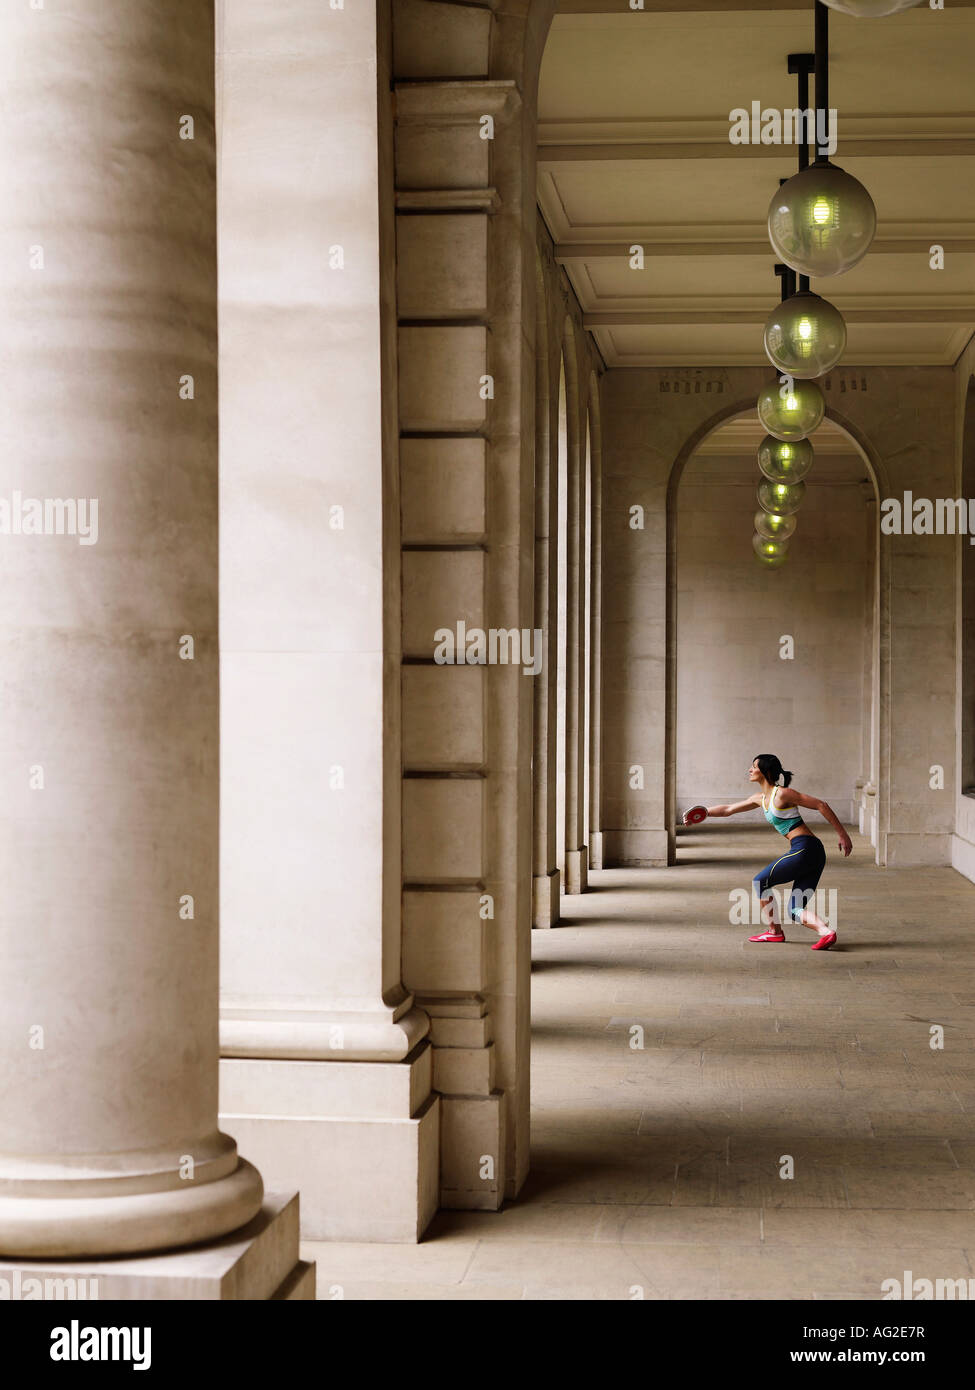 Female athlete throwing discus in portico, side view Stock Photo